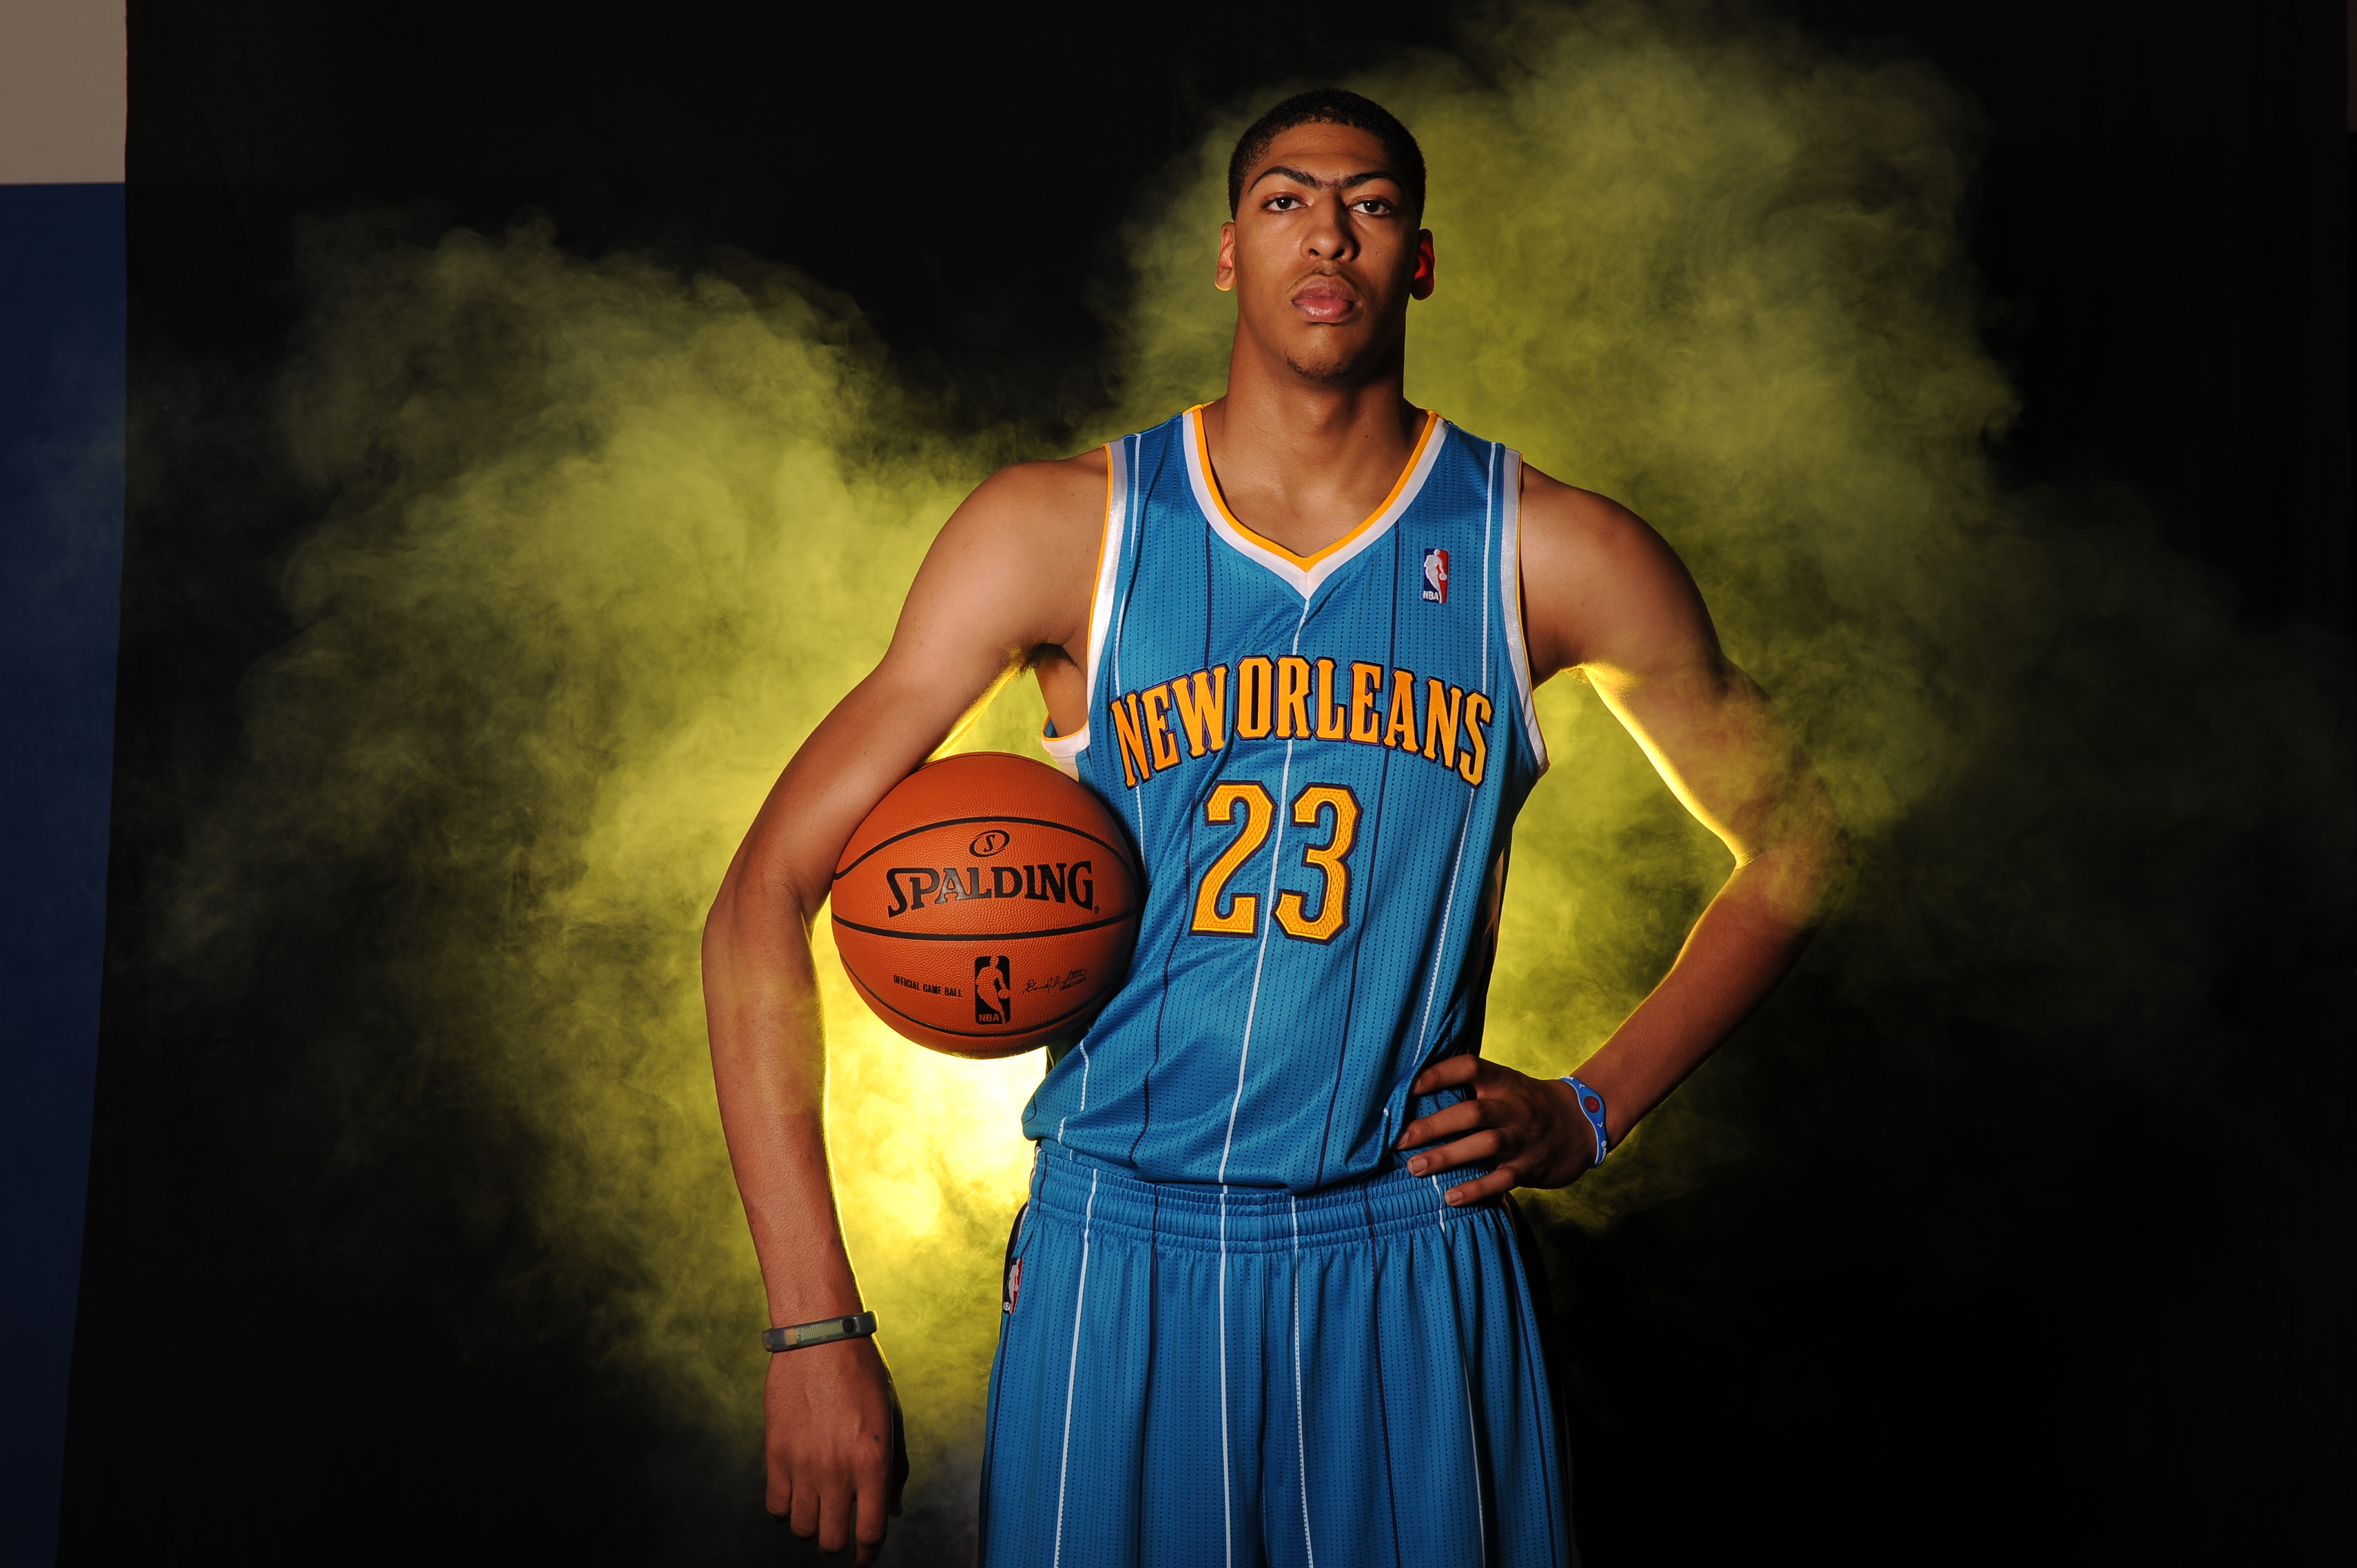 Anthony Davis, with a frail 221-pound frame, entered the league as the No. 1 overall pick by the then-New Orleans Hornets in 2012